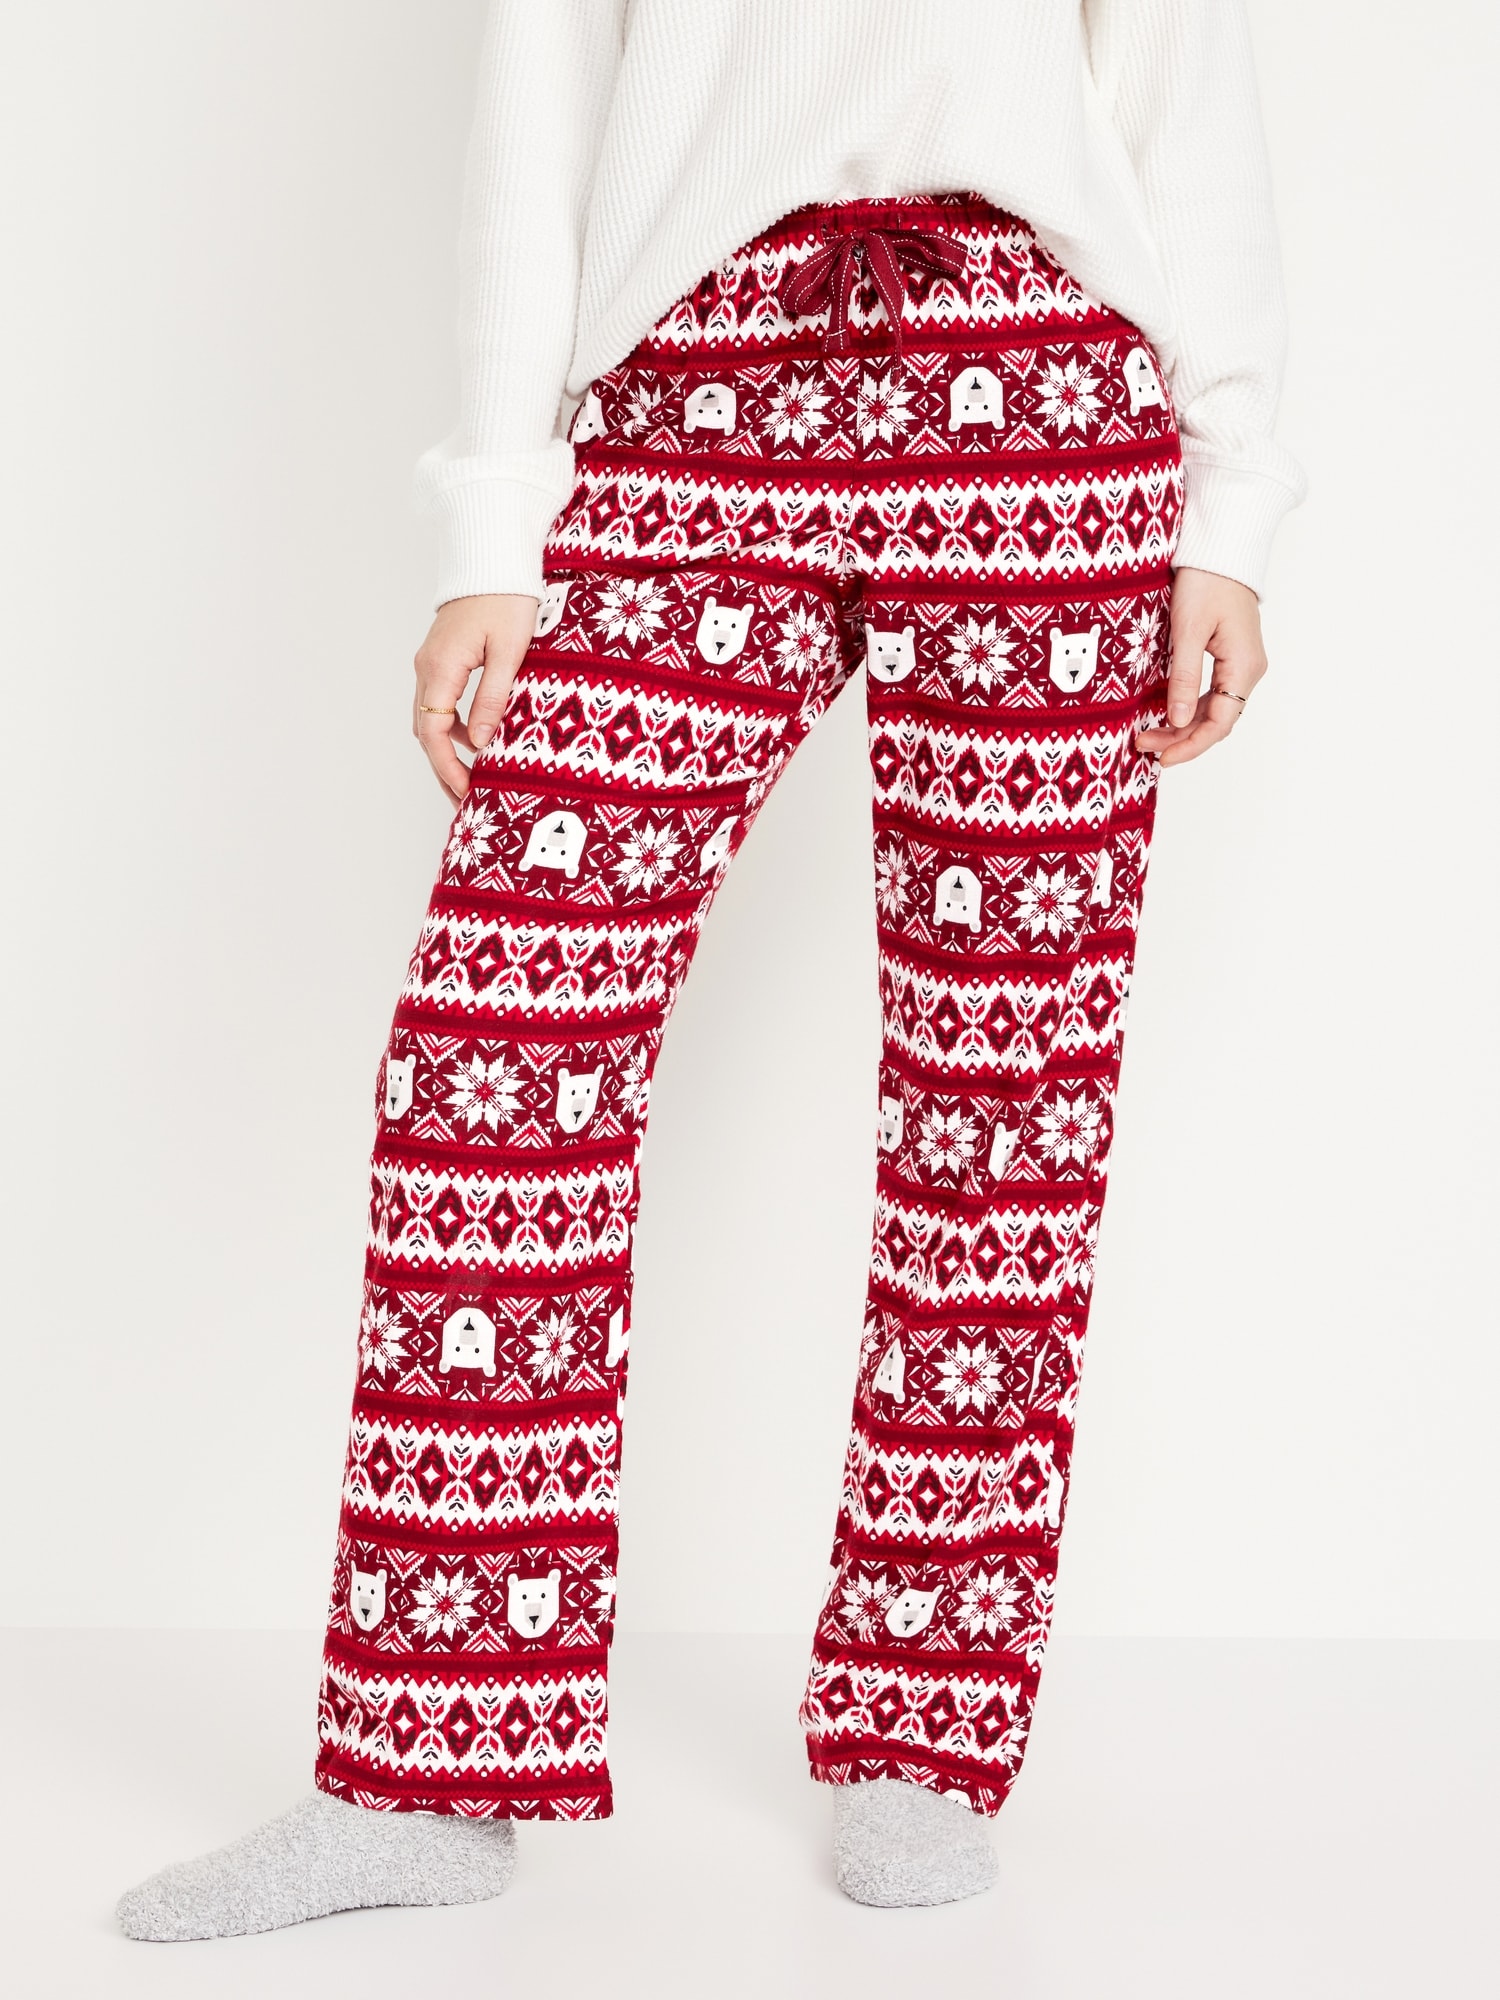 Women's Checkered Flannel Pajama Pants - Stars Above™ Red XL